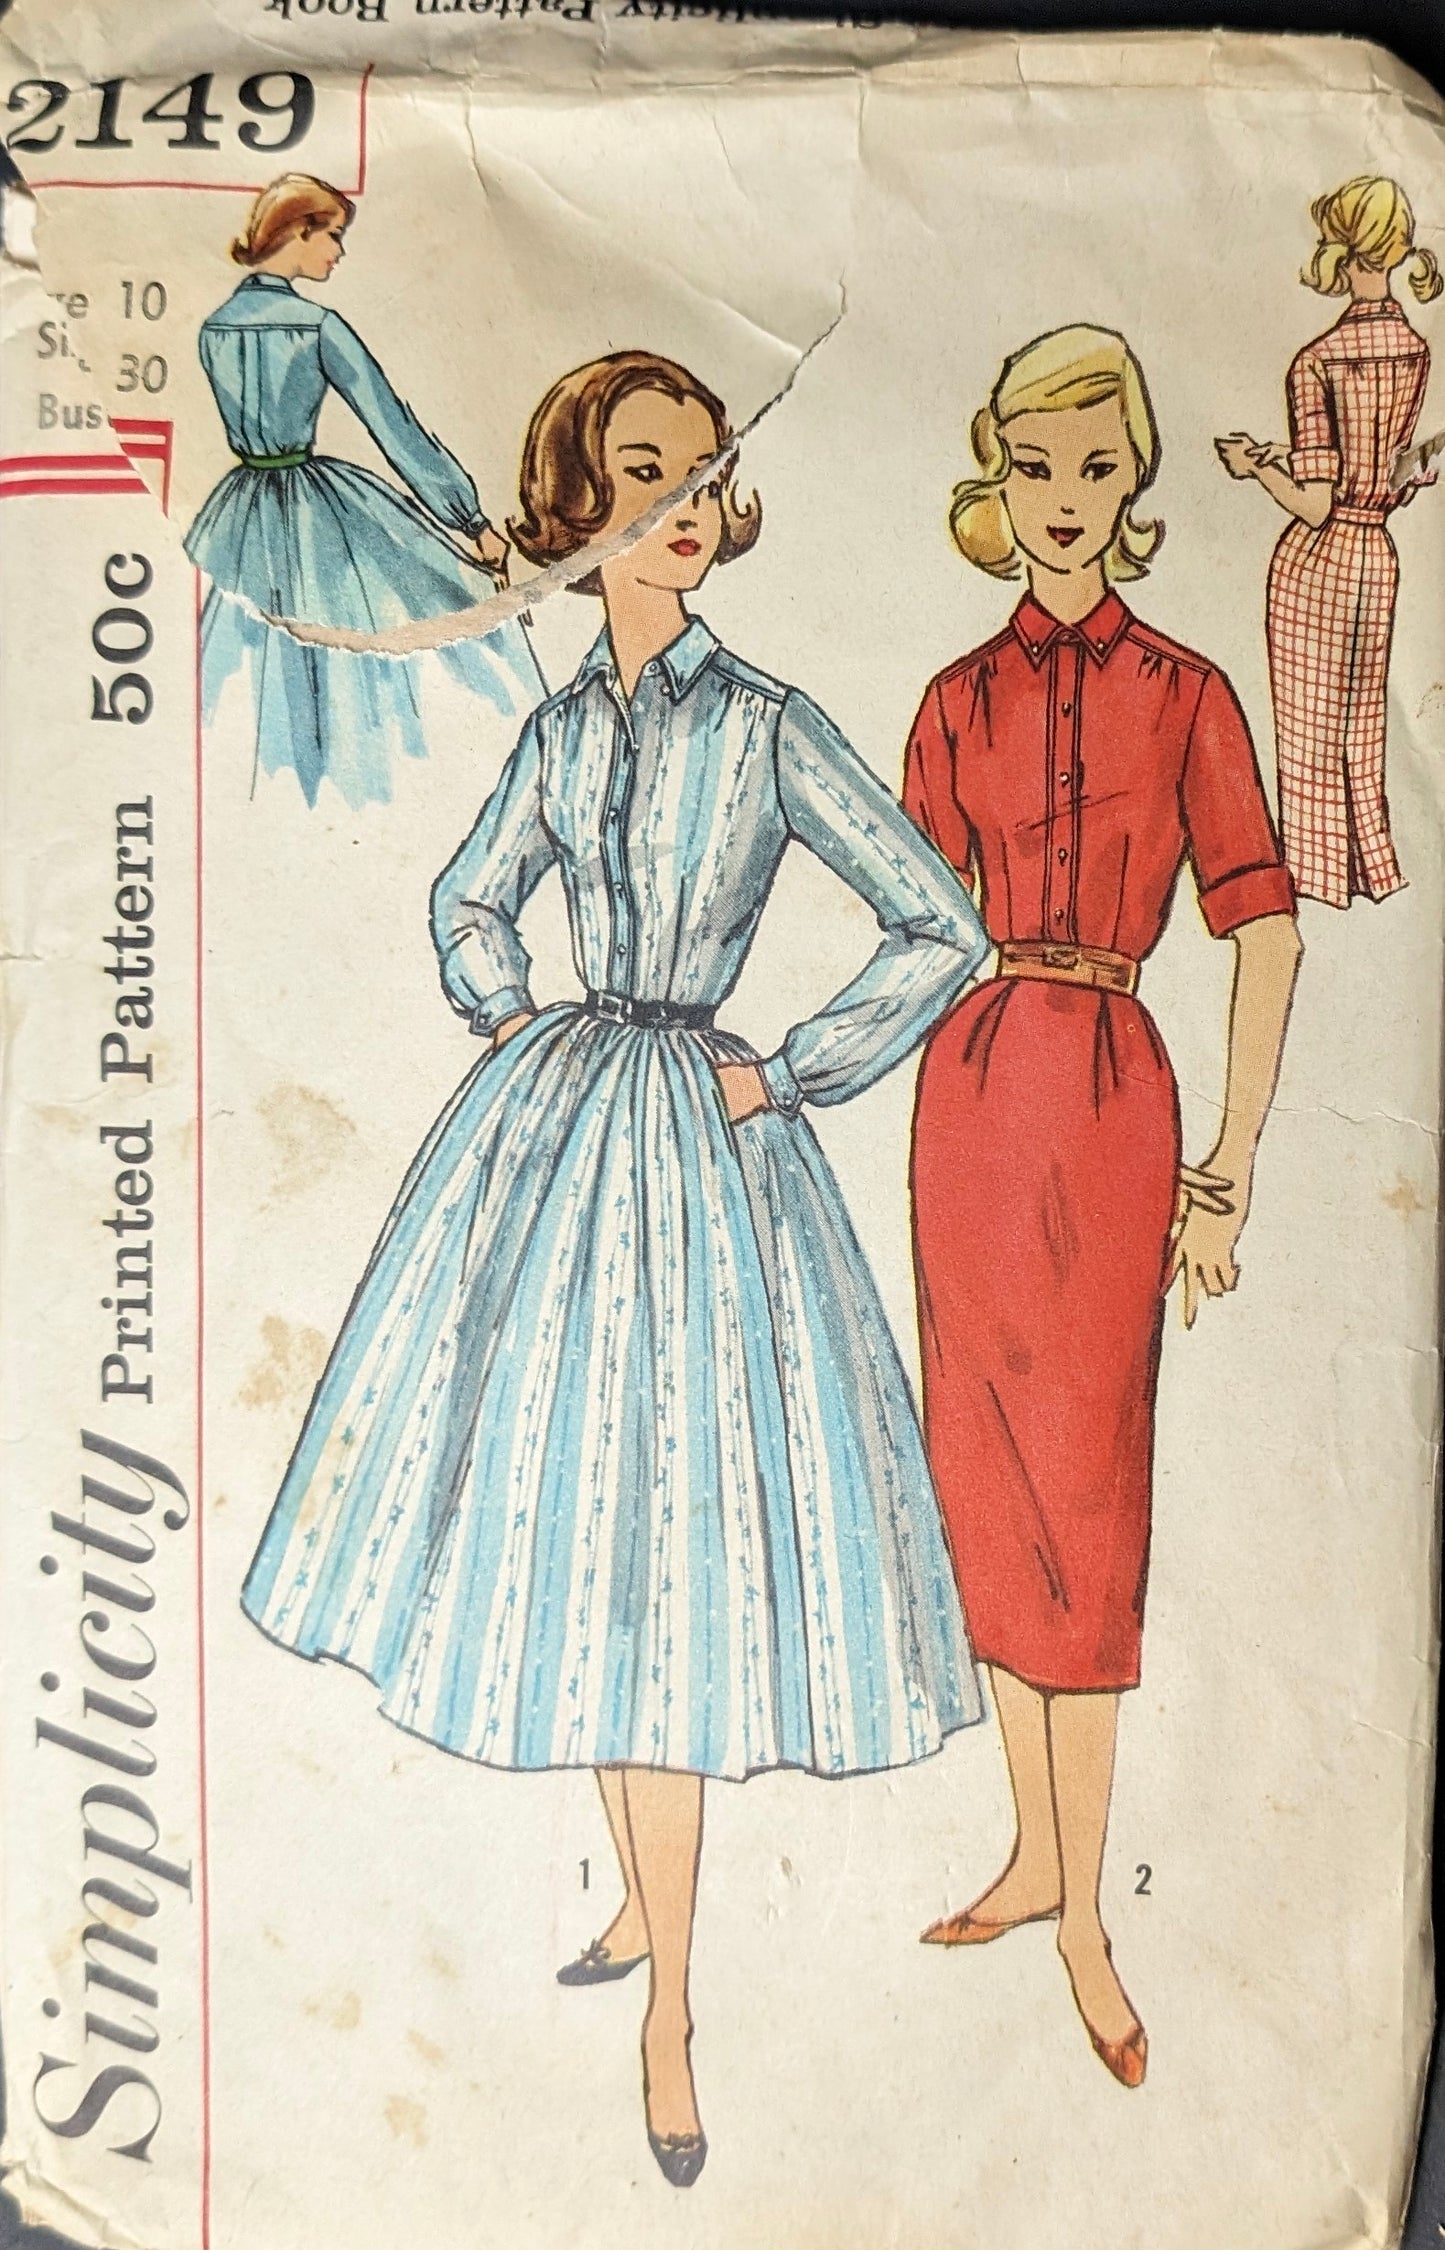 1950s - 1960s Original Vintage Sewing Pattern: Simplicity 2149 Size 10